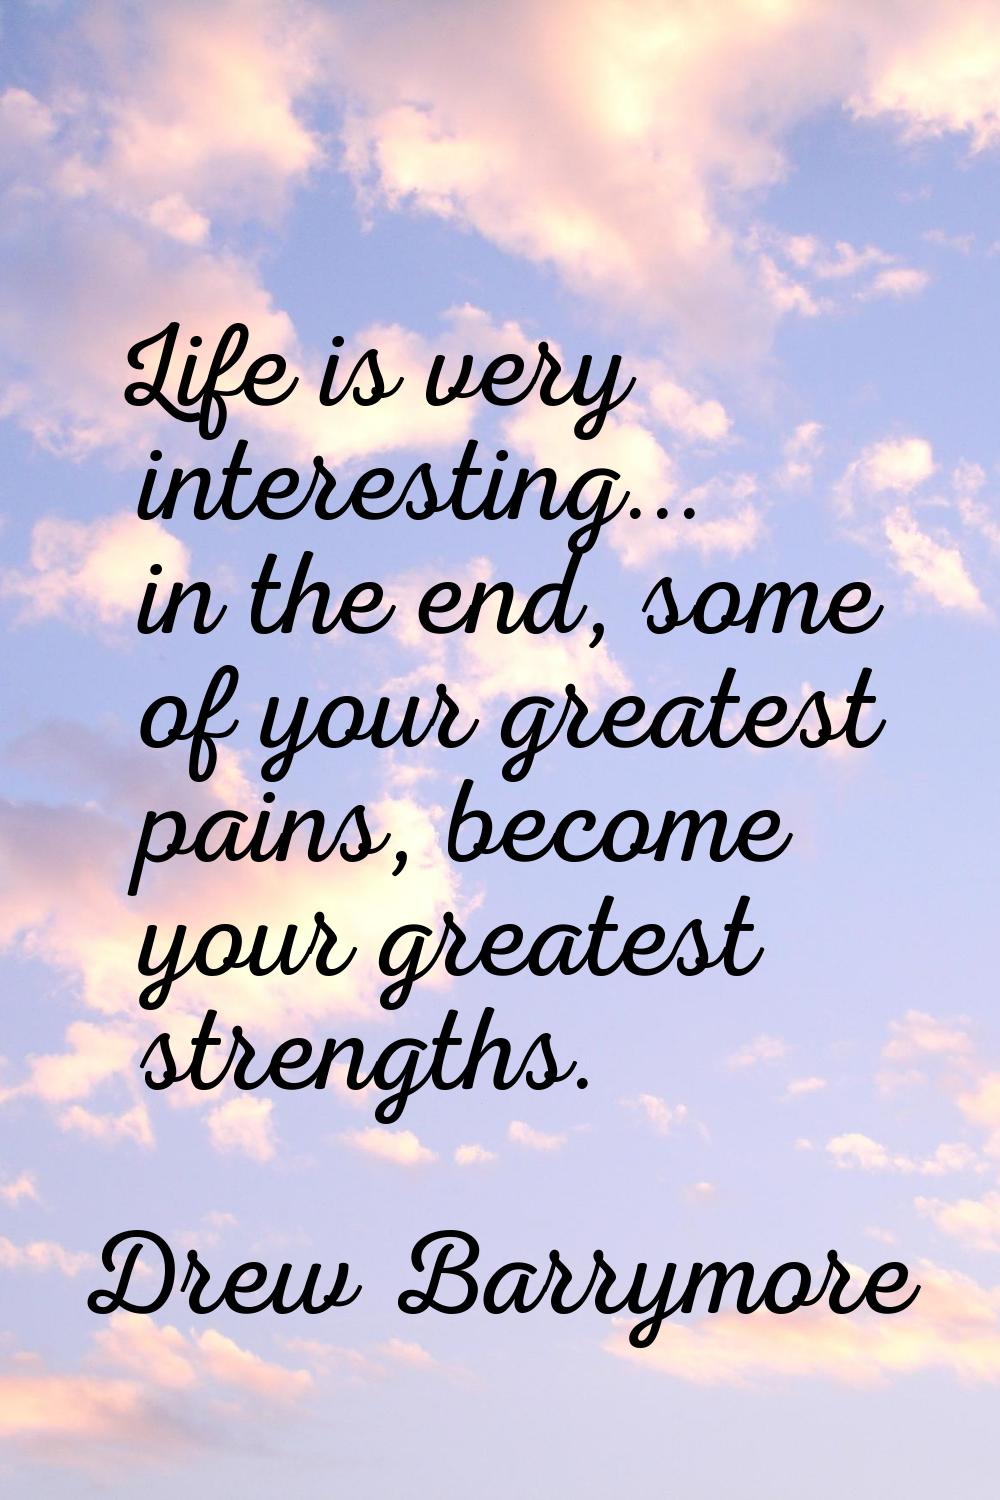 Life is very interesting... in the end, some of your greatest pains, become your greatest strengths